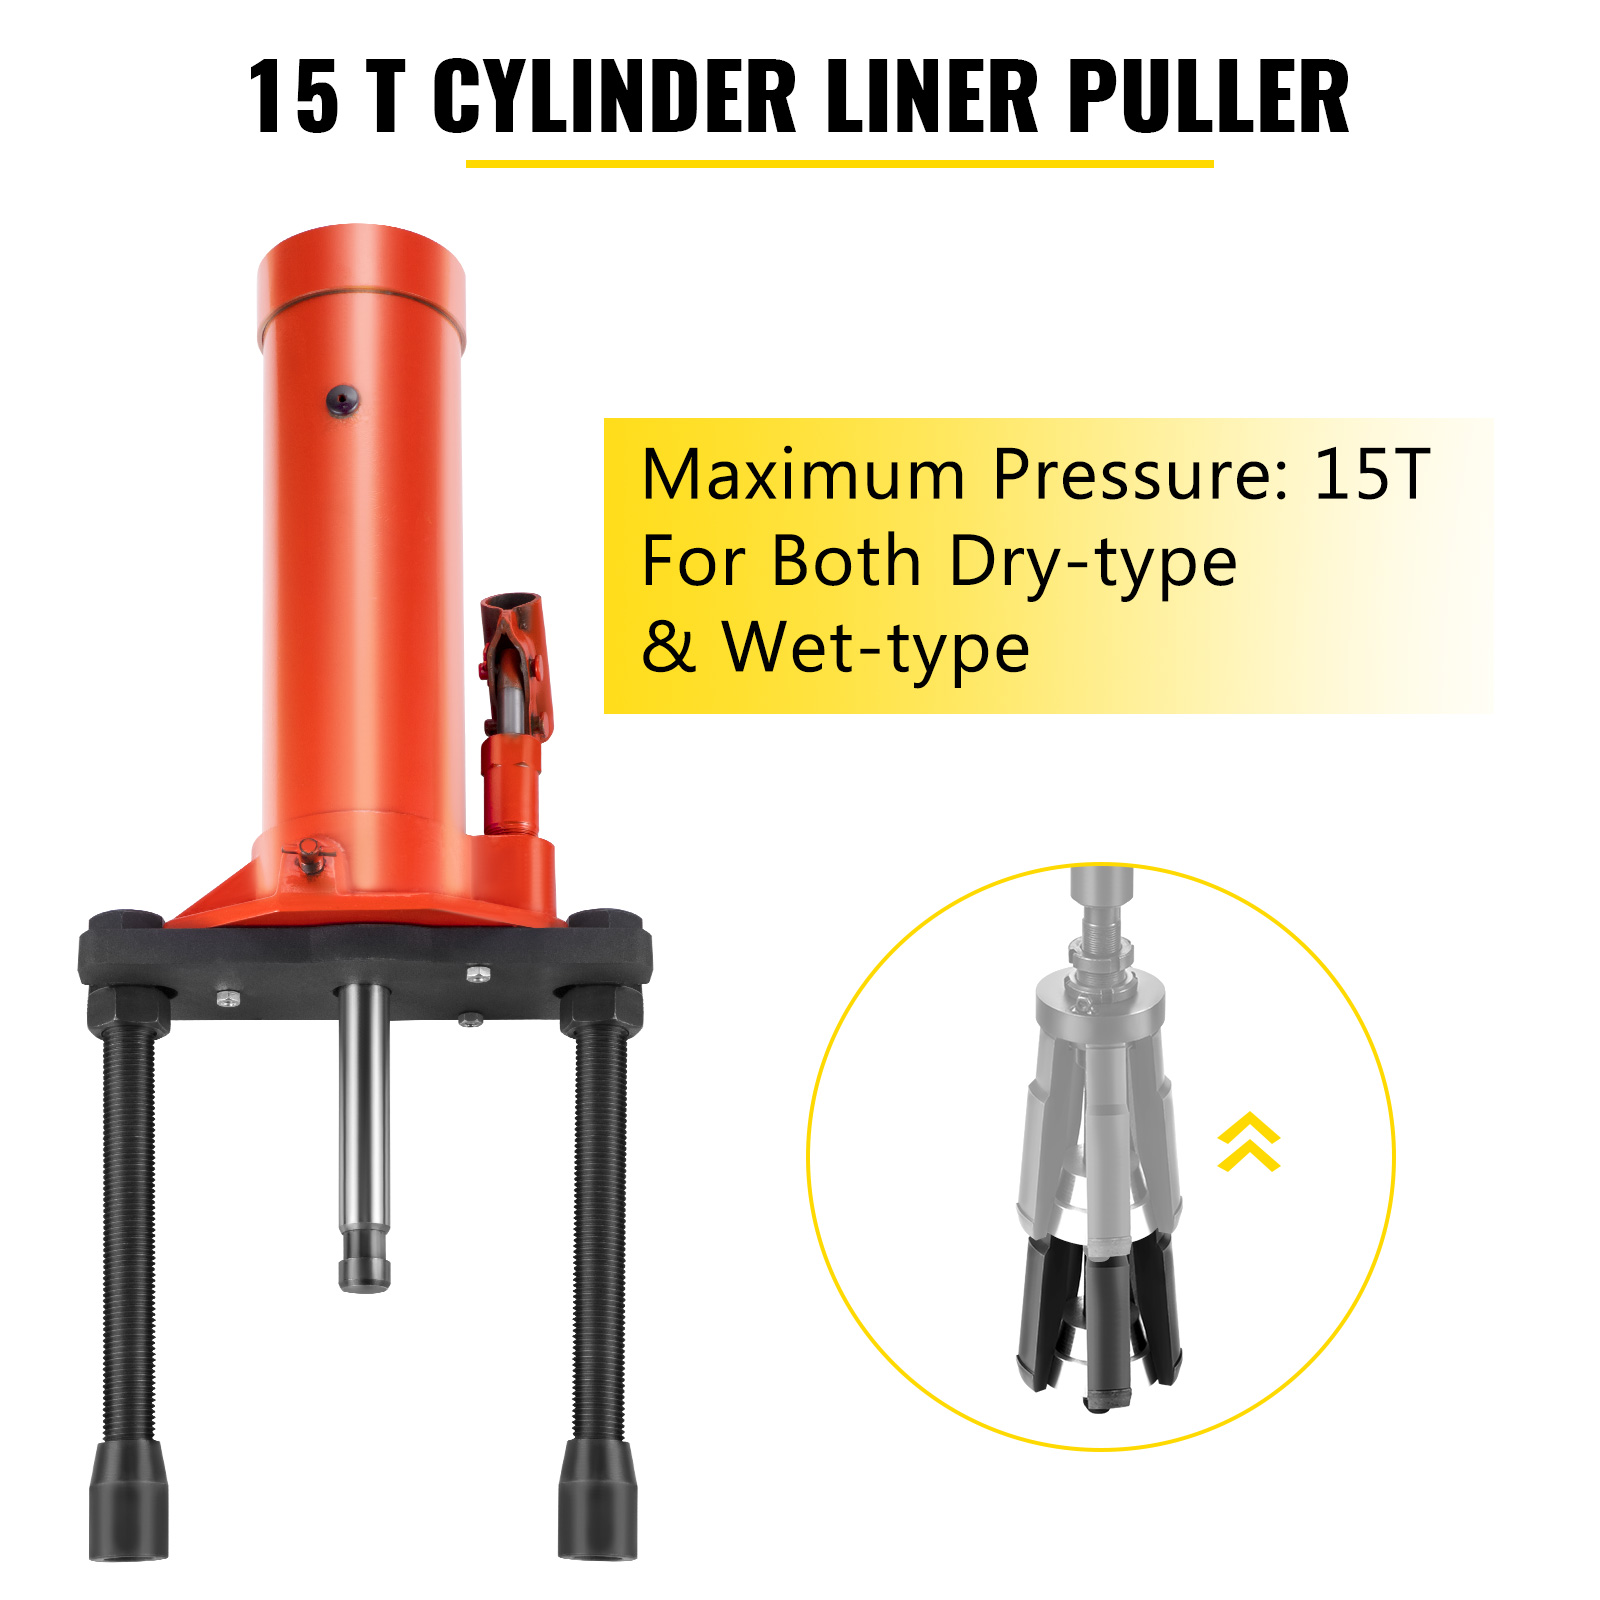 New Arrival 10T Hydraulic Cylinder Liner Puller Dry-Type Splitter 80-137mm 